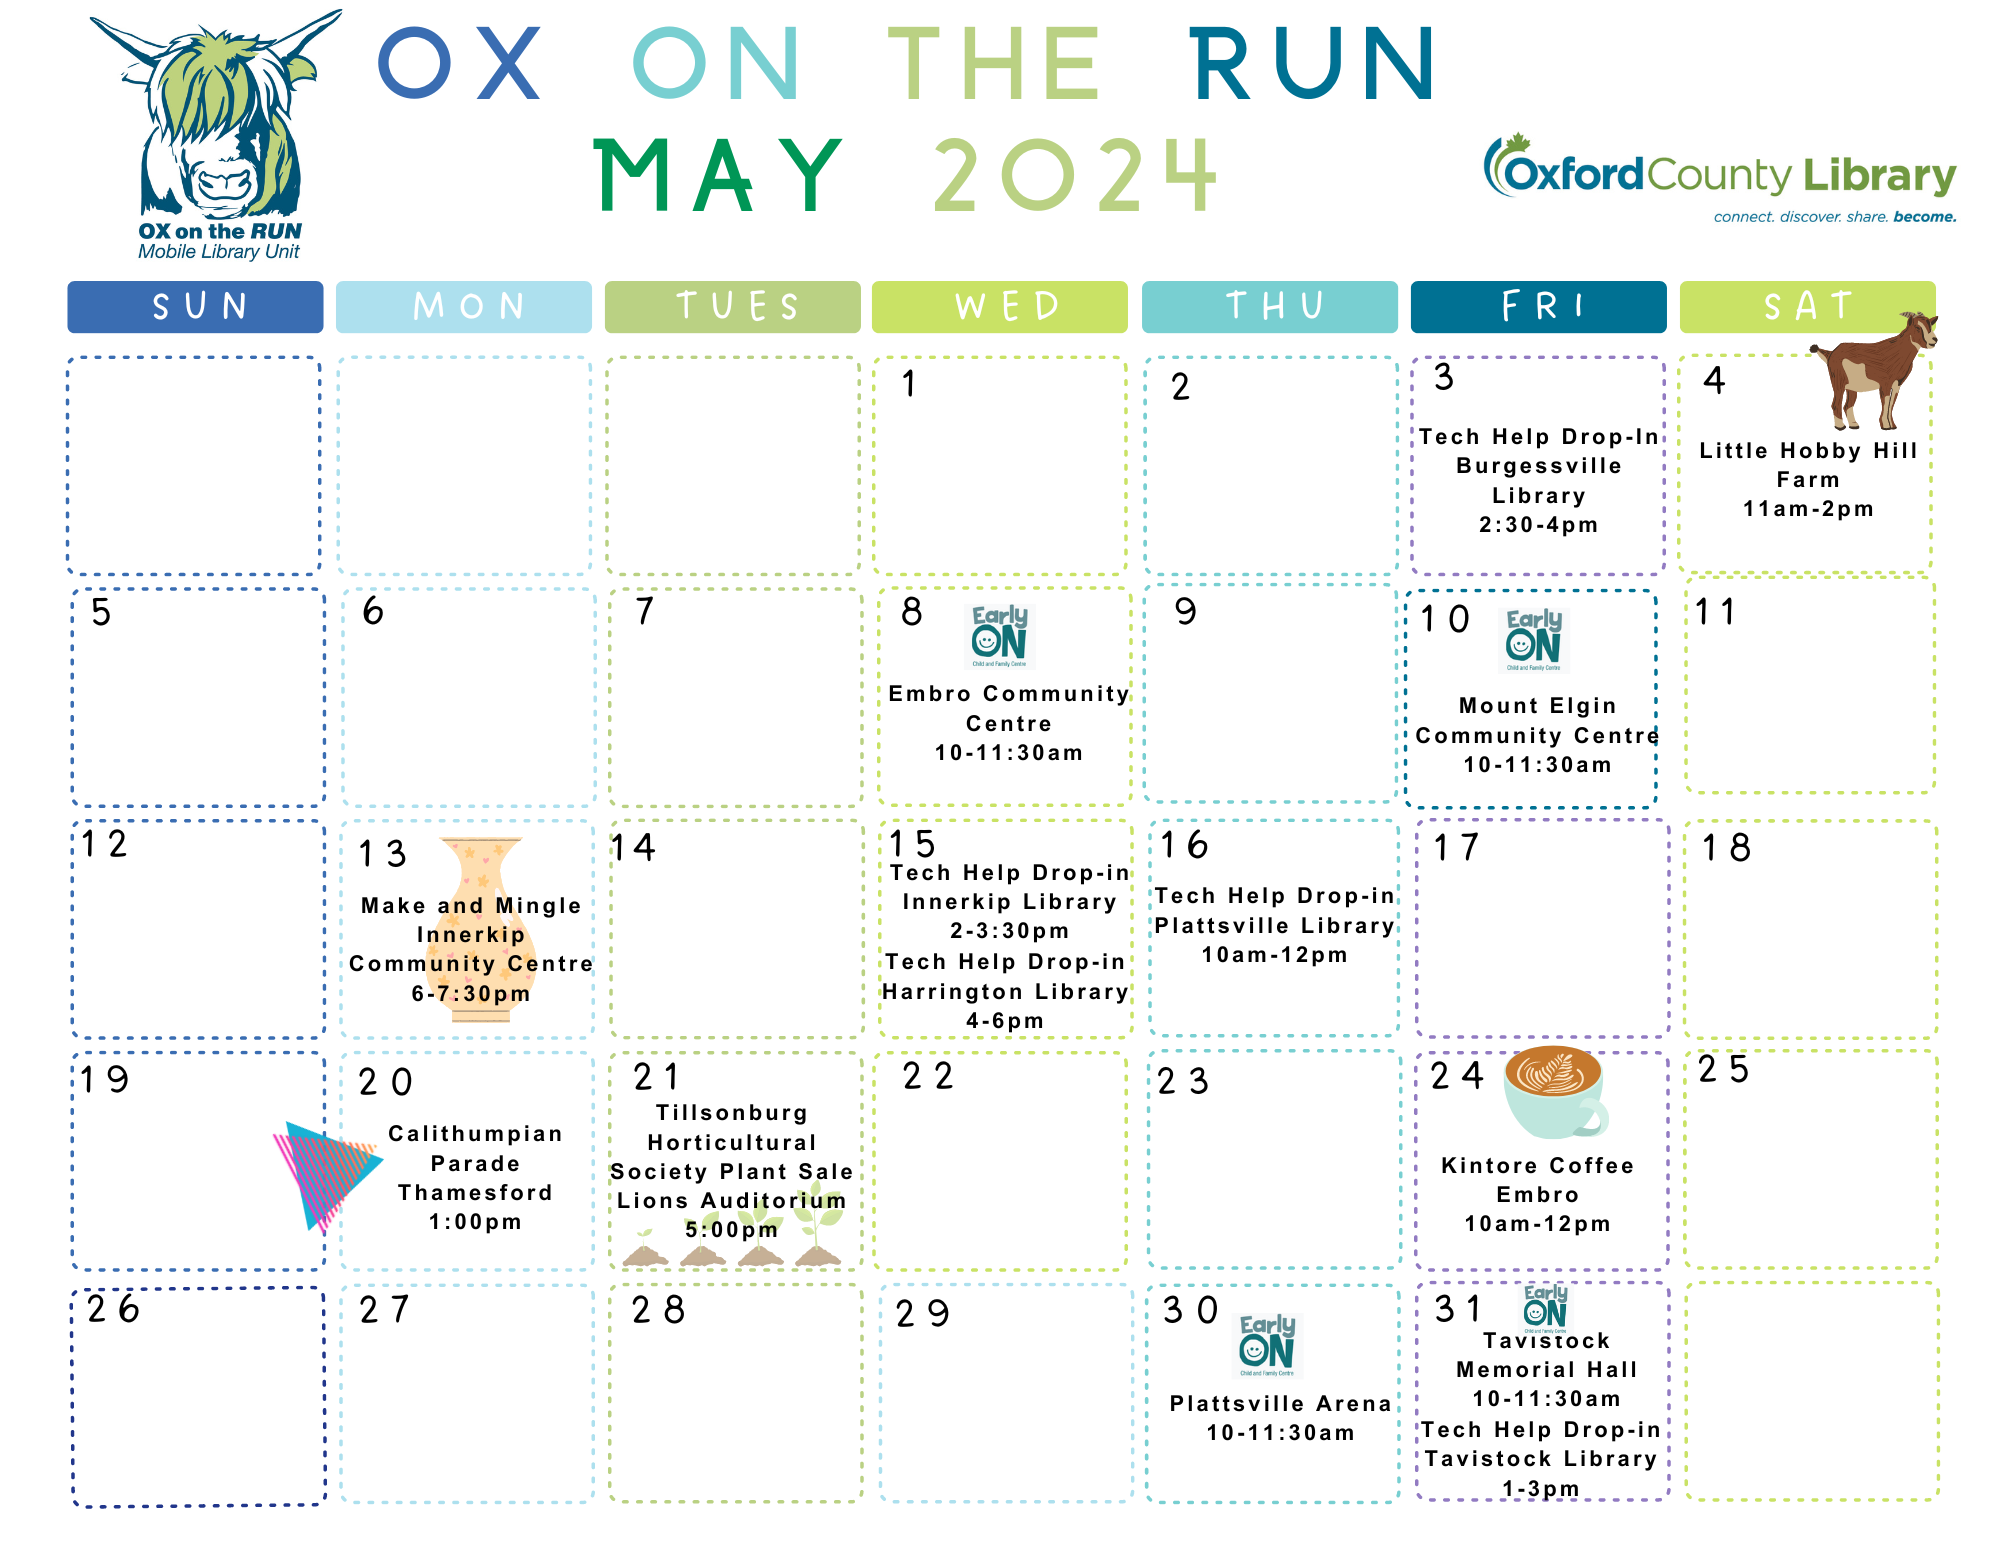 Ox on the Run May 2024 schedule